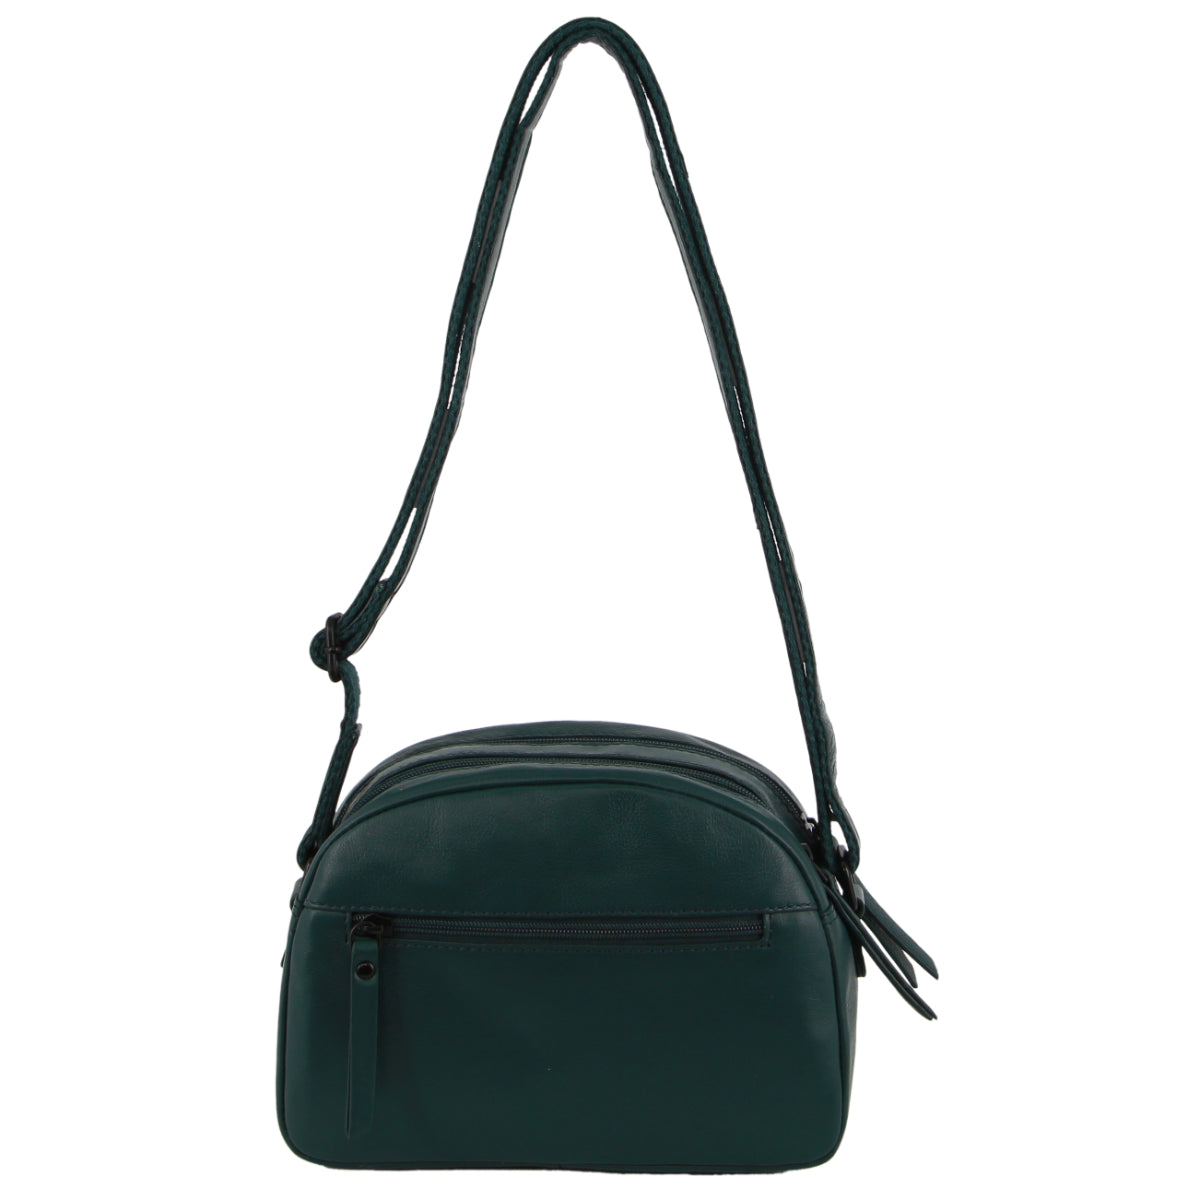 Milleni - NL3869 Small rounded leather sidebag - Zircon-3